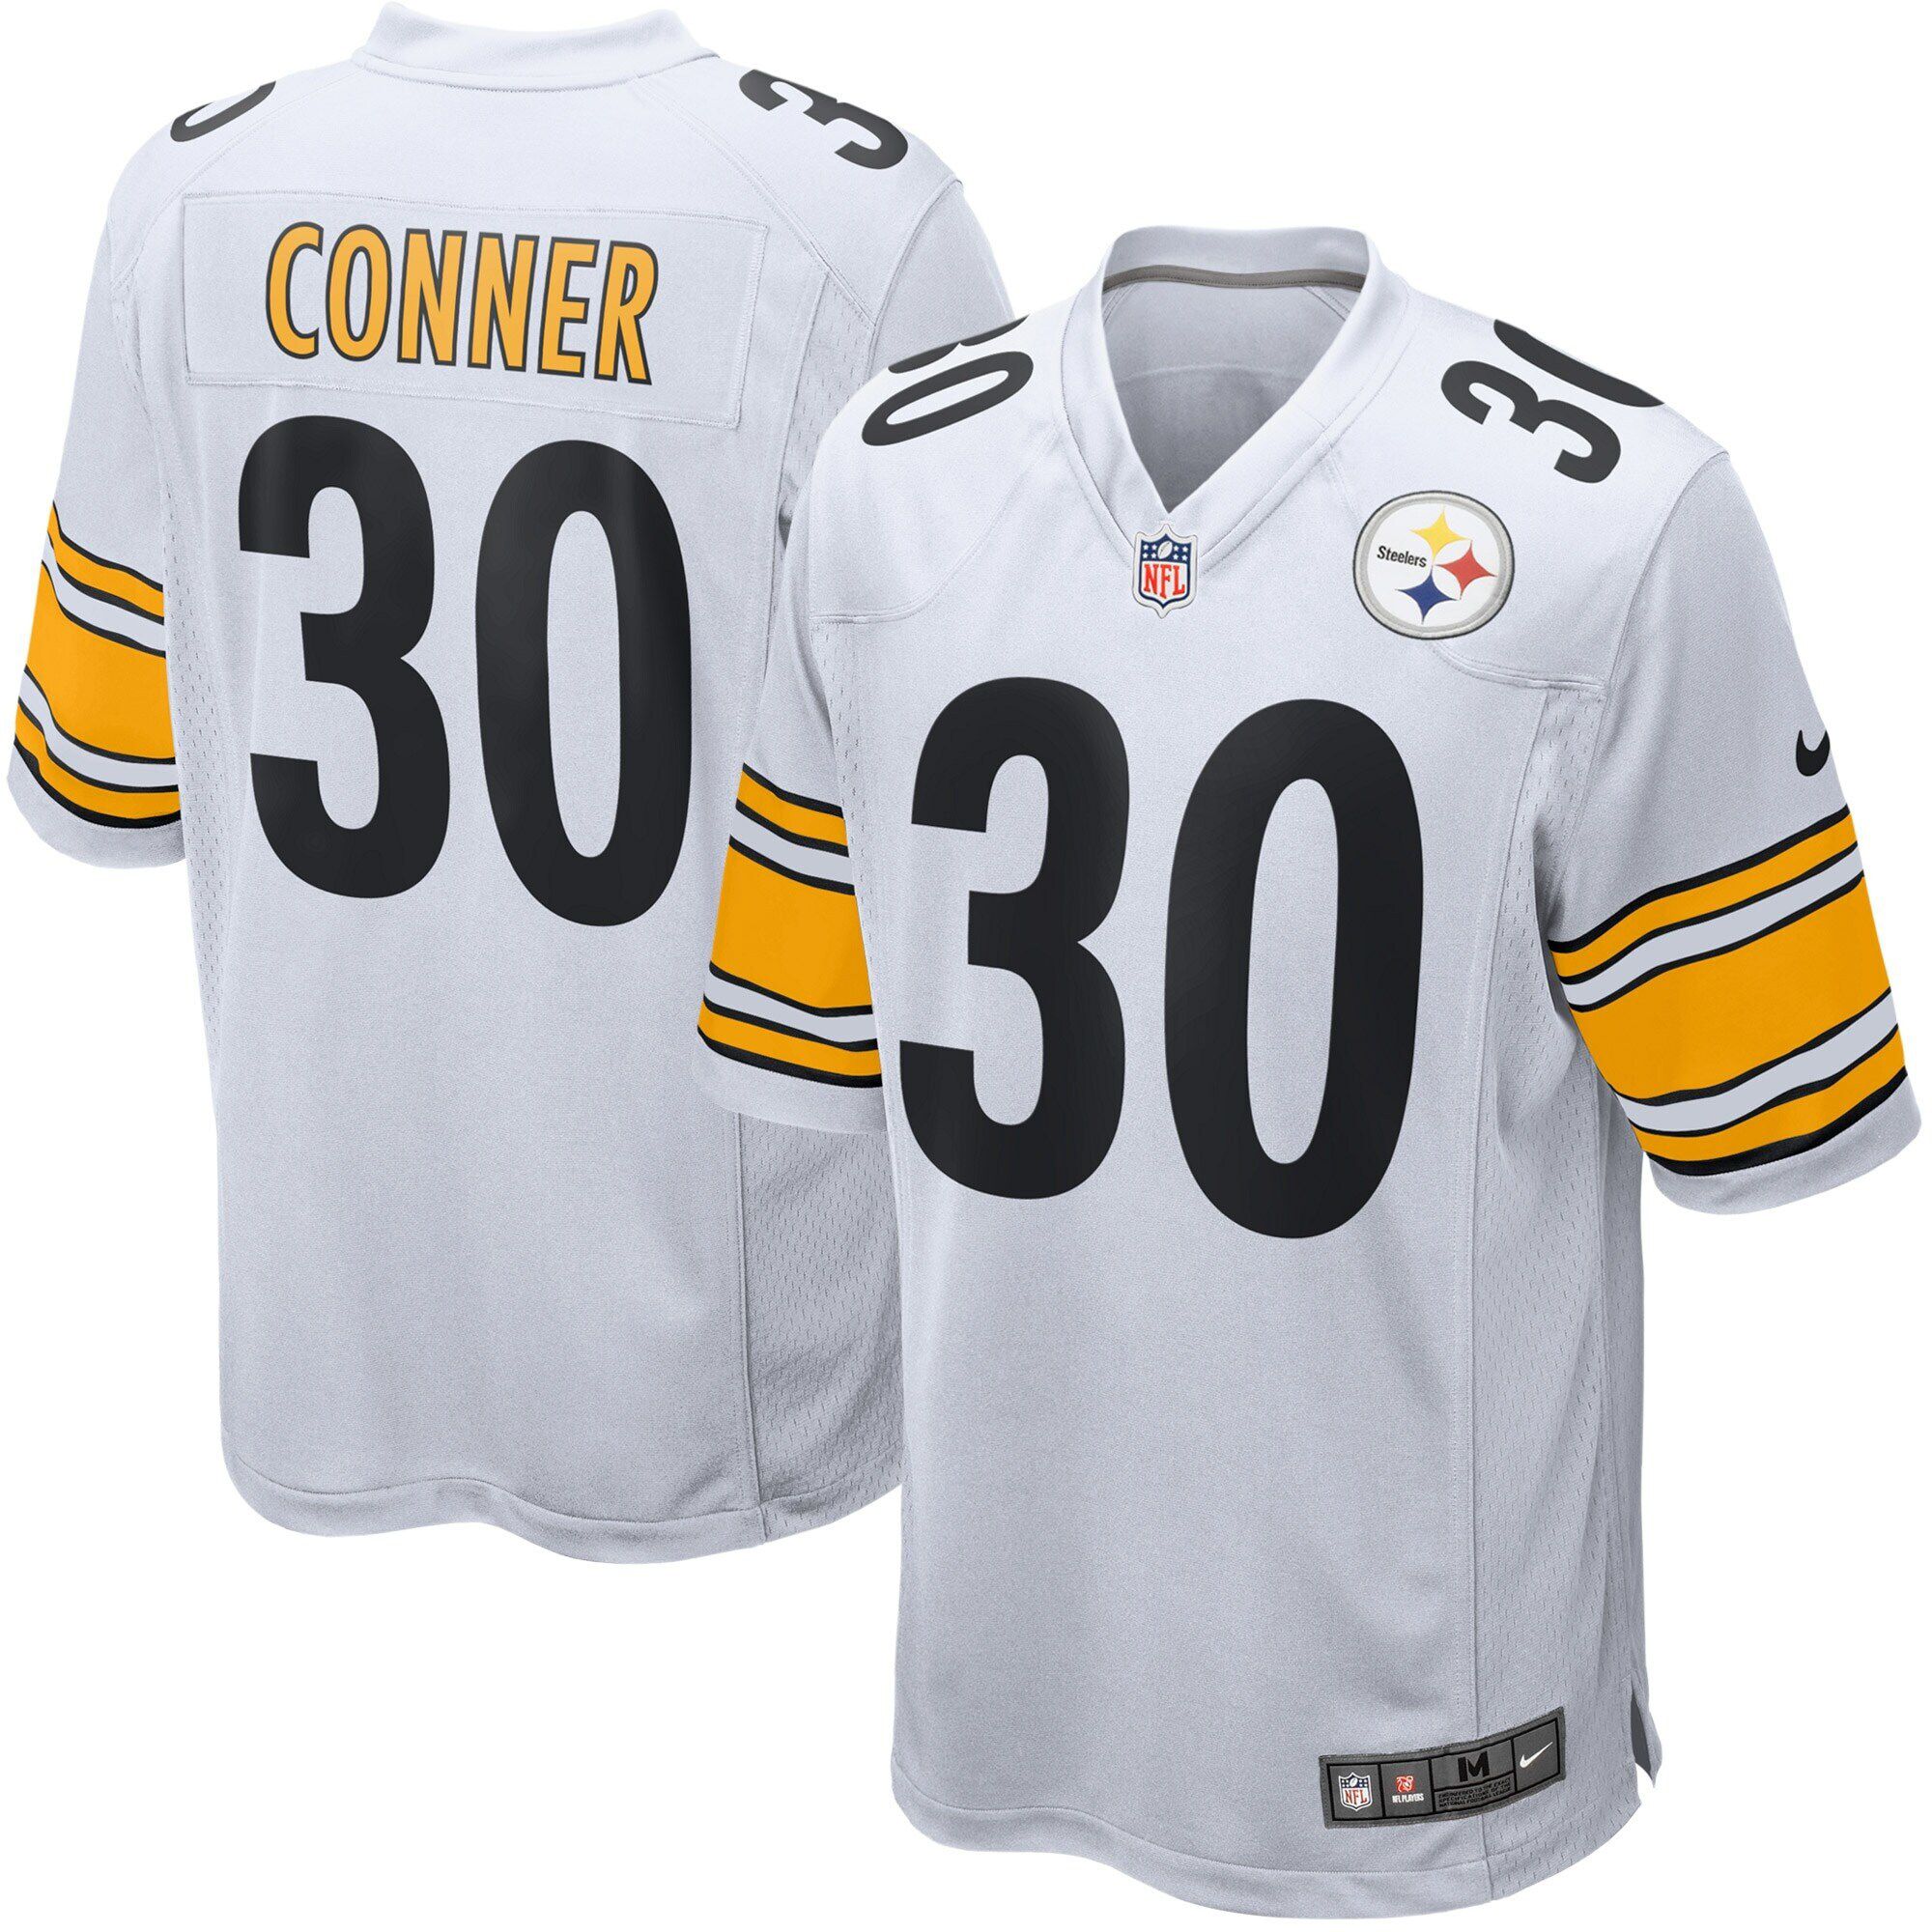 Men Pittsburgh Steelers #30 James Conner Nike White Game NFL Jersey